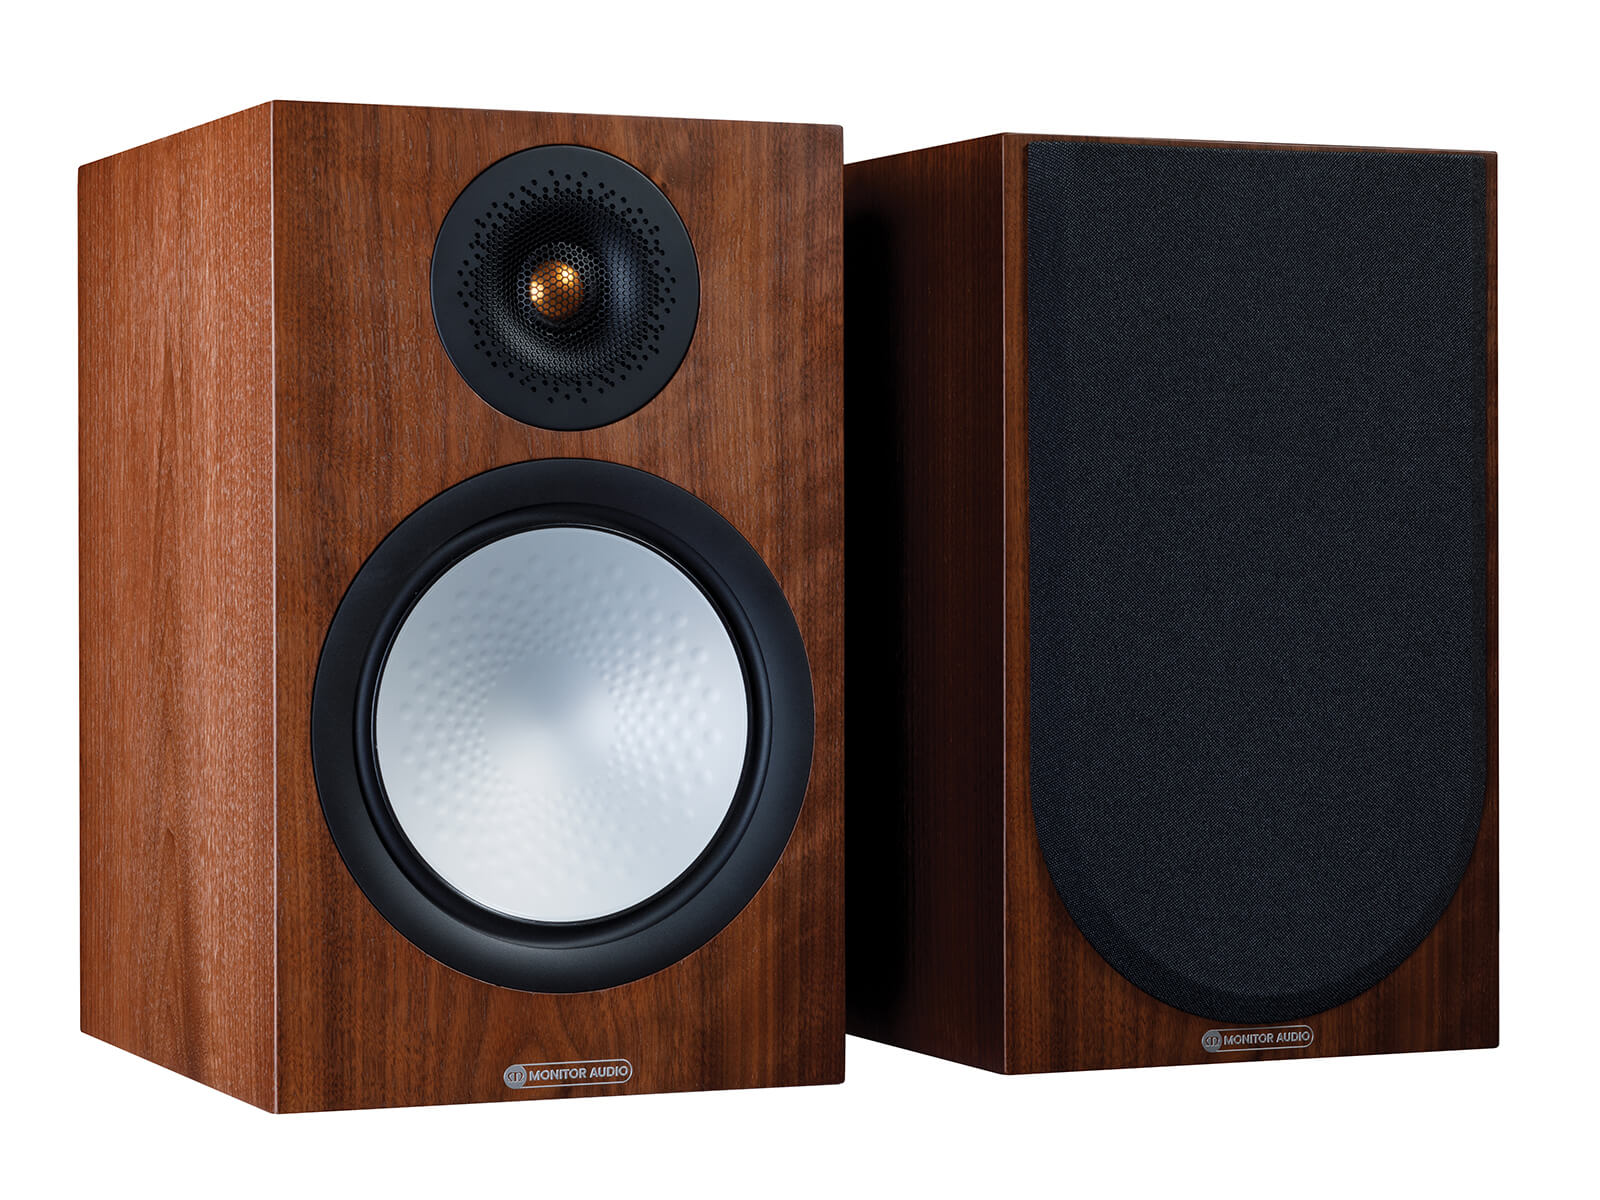 A pair of Monitor Audio's Silver 100 7G, in a natural walnut finish, iso view, with and without grilles.